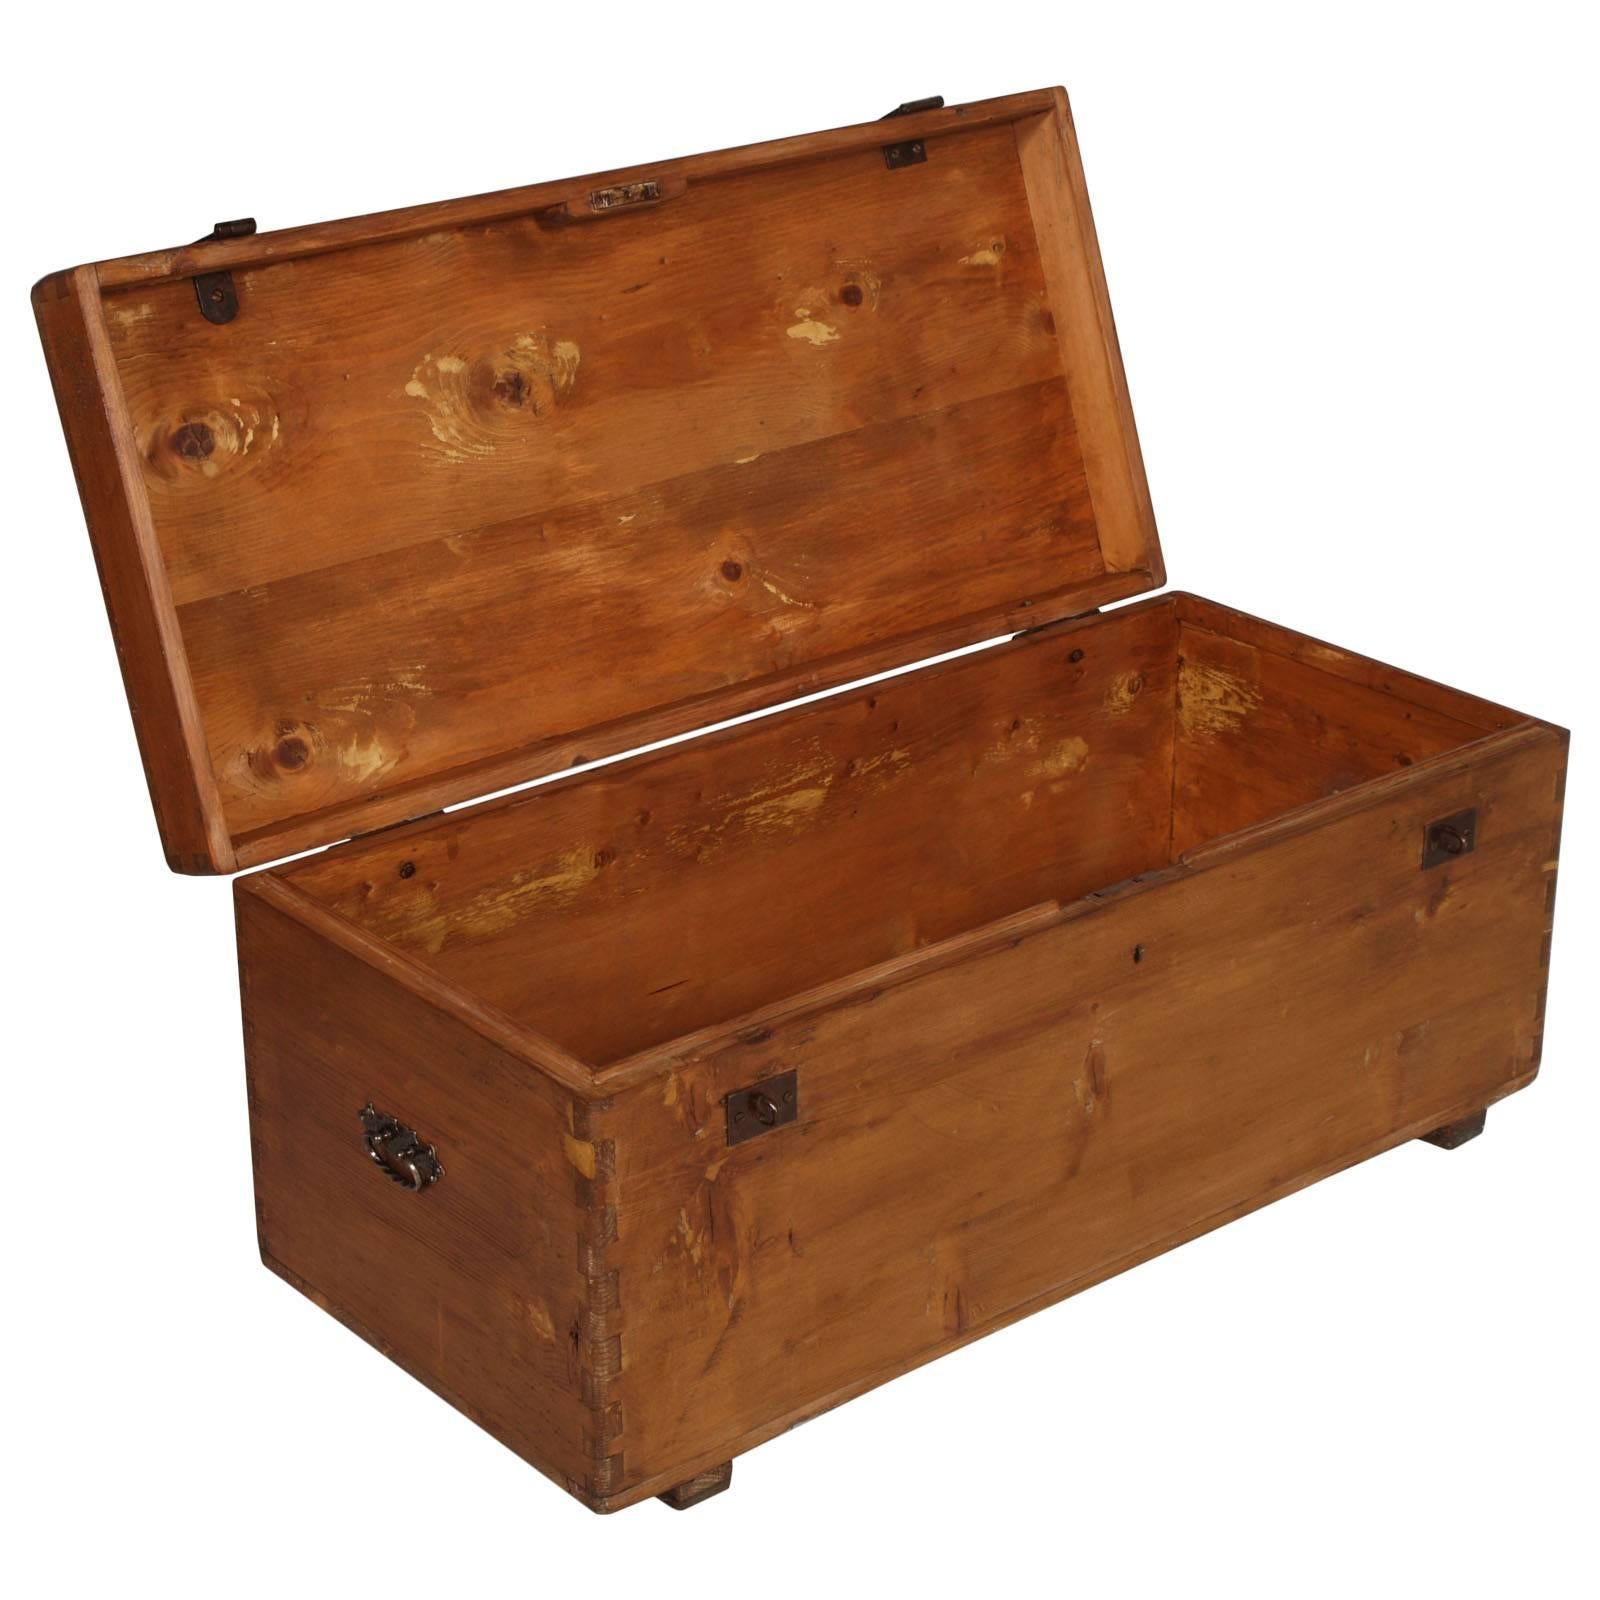 1890s country traveling trunk chest in solid wood restored polished to wax.

Measures cm: H 42, W 100, D 45.